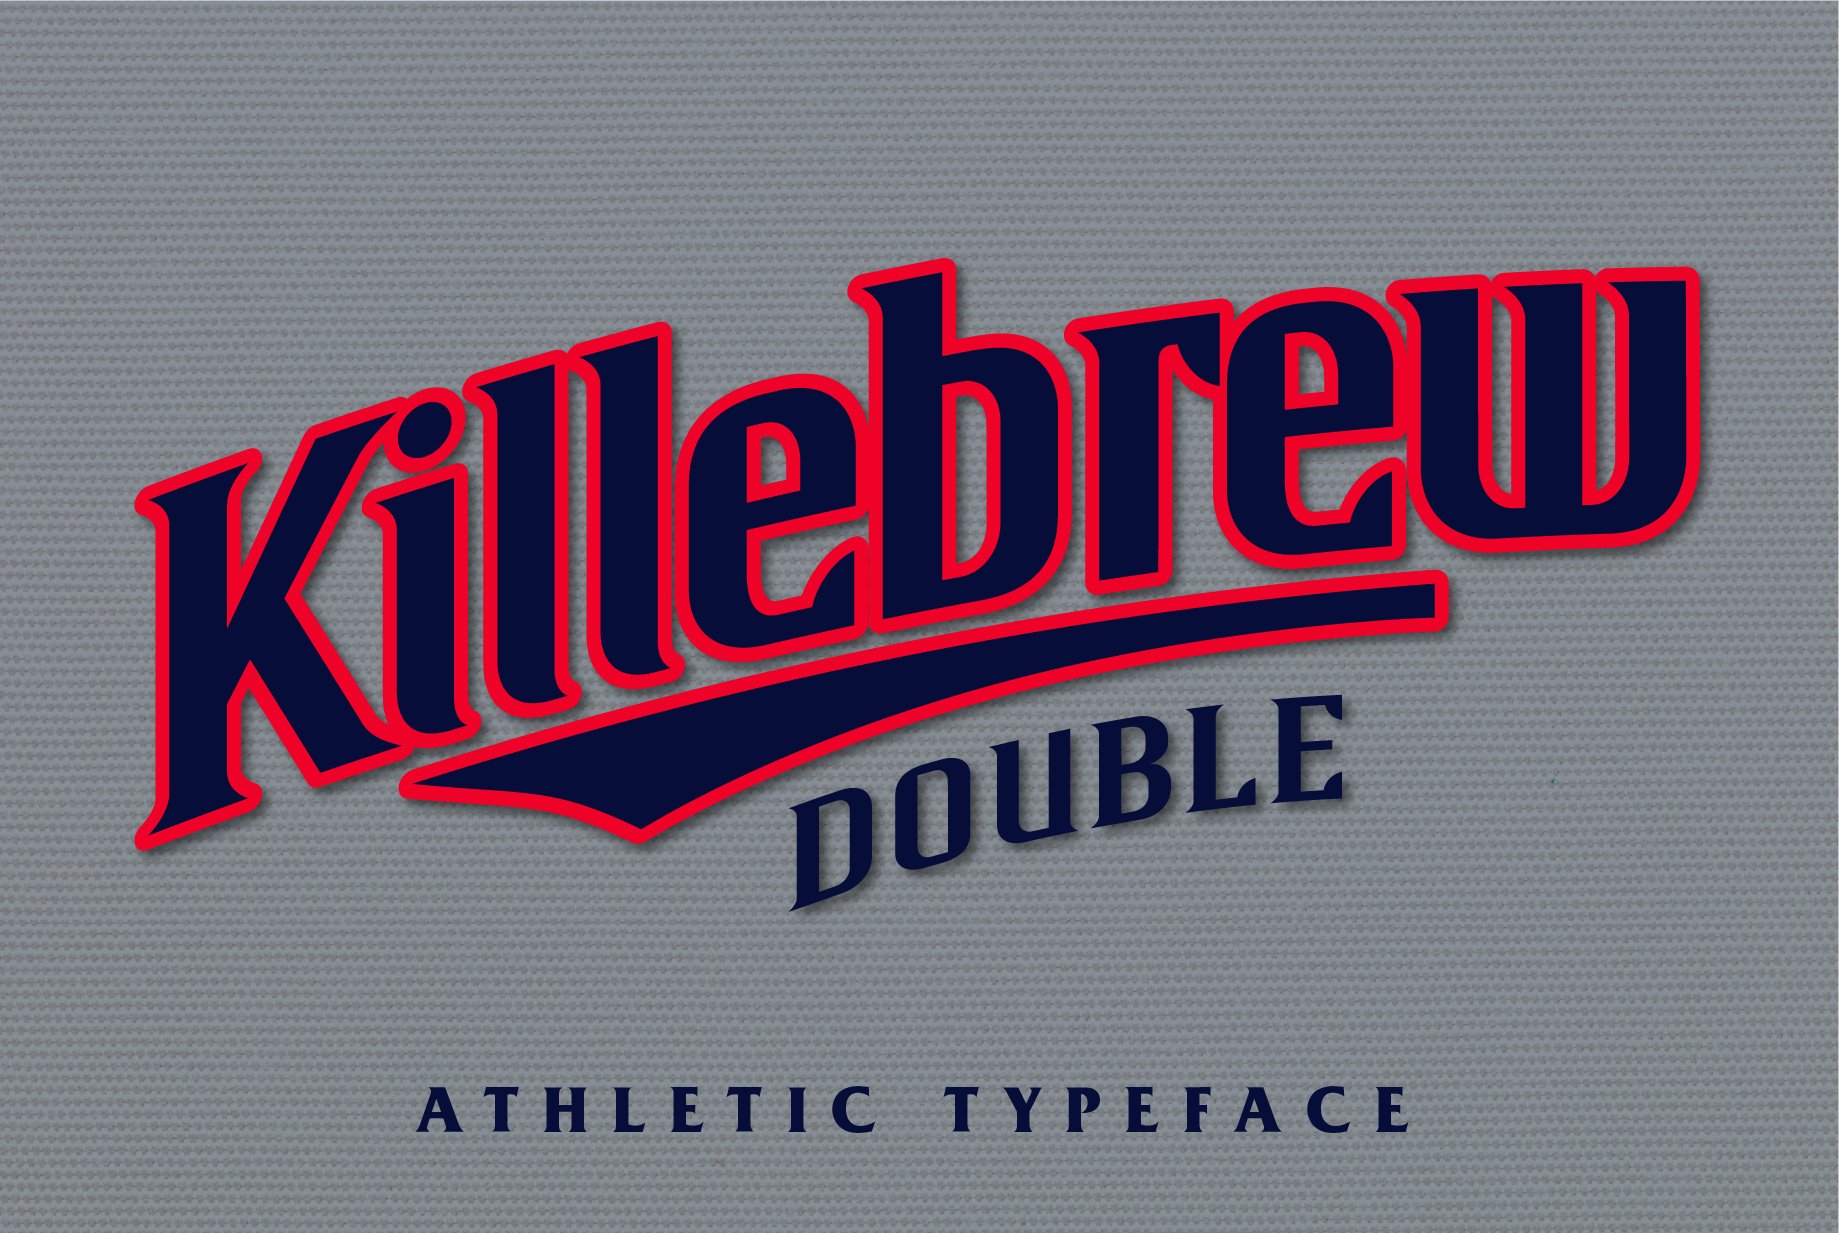 Killebrew Double | Athletic Typeface cover image.